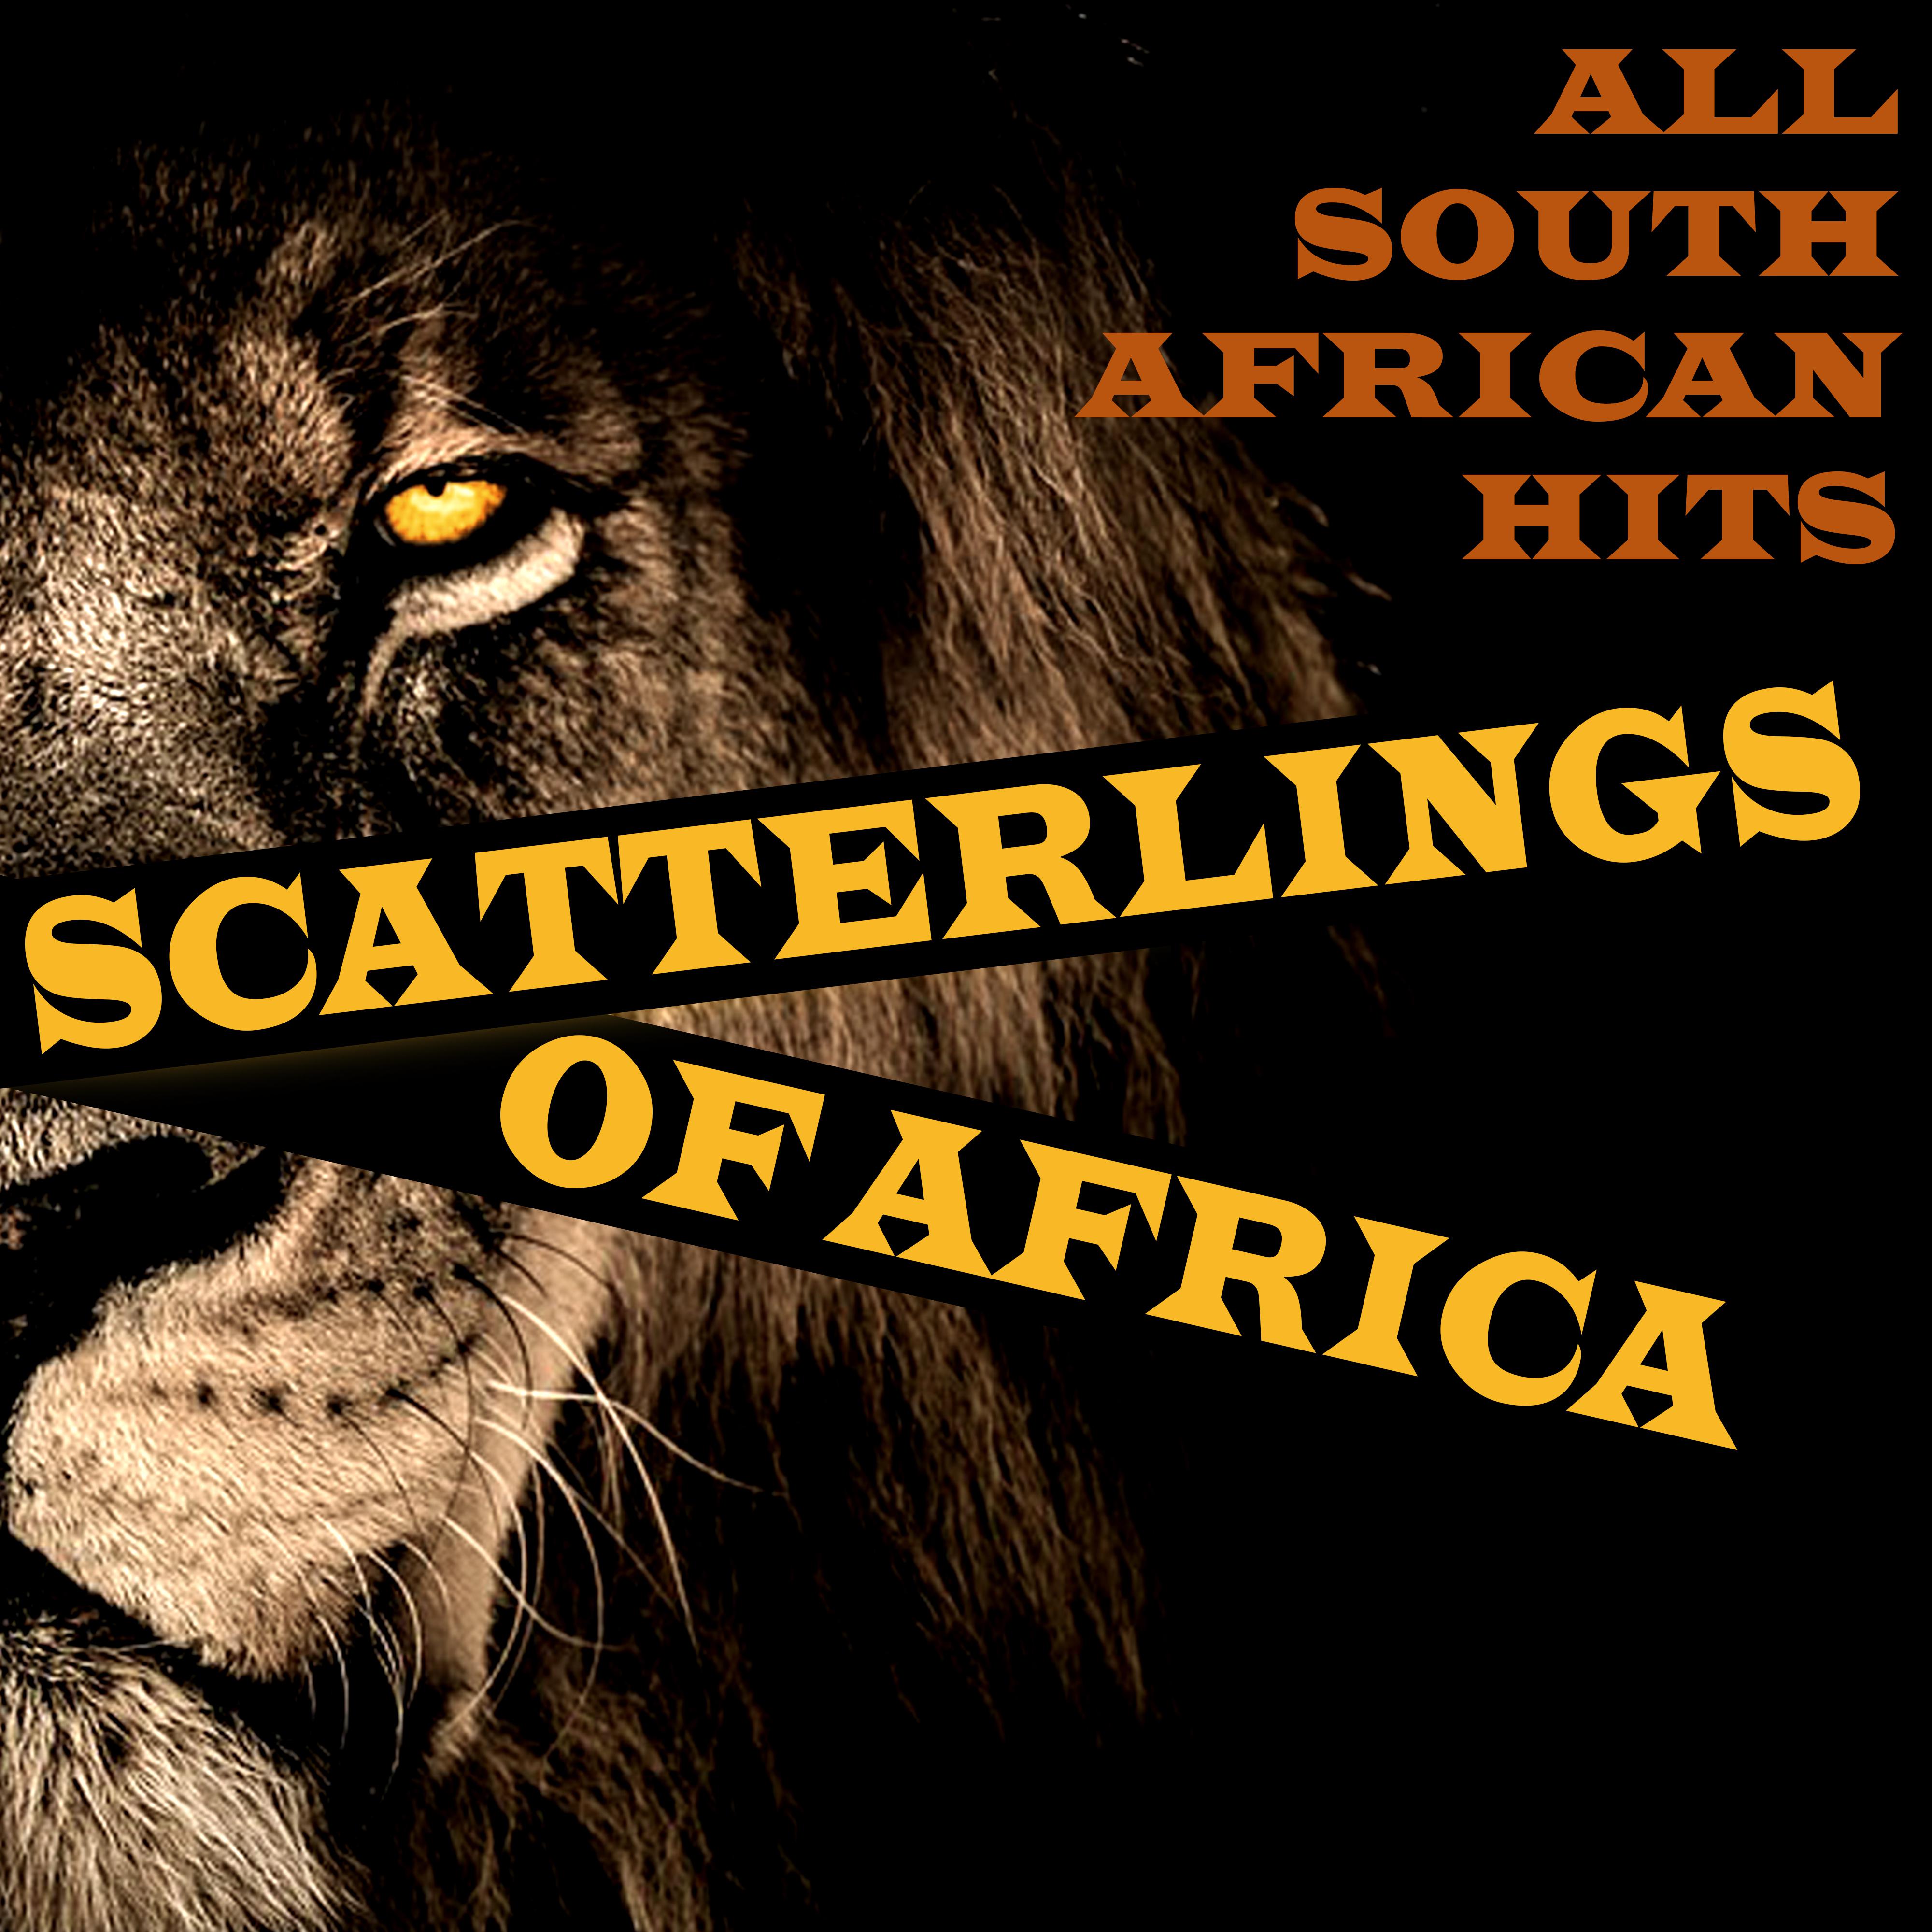 Scatterlings of Africa - All South African Hits